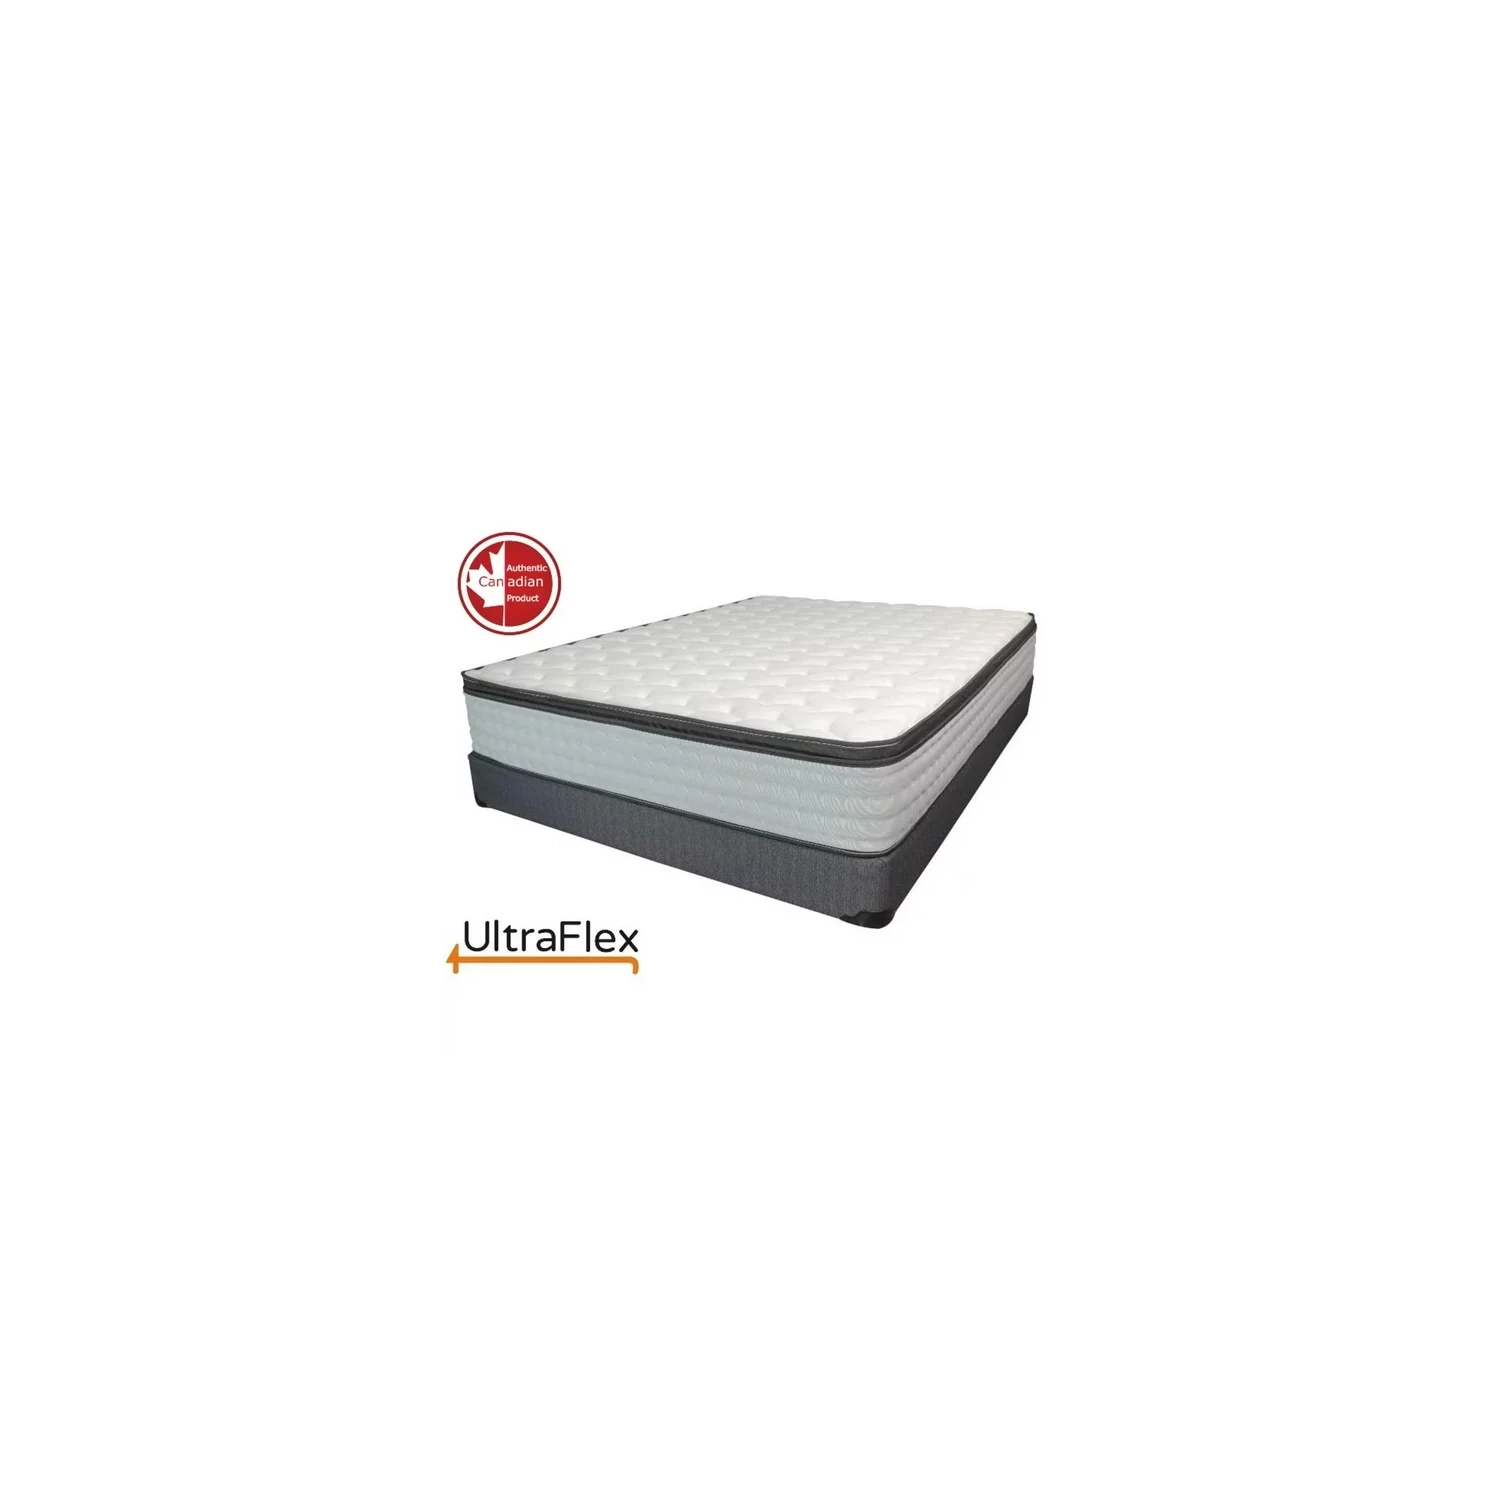 UltraFlex LUSH- 12” Hybrid Orthopedic Eurotop Mattress with Spinal Care Pocket Coil, Premium High Density Foam , Pressure-Relieving Comfort Foam, HDcoil Pocketed (Made in Canada)